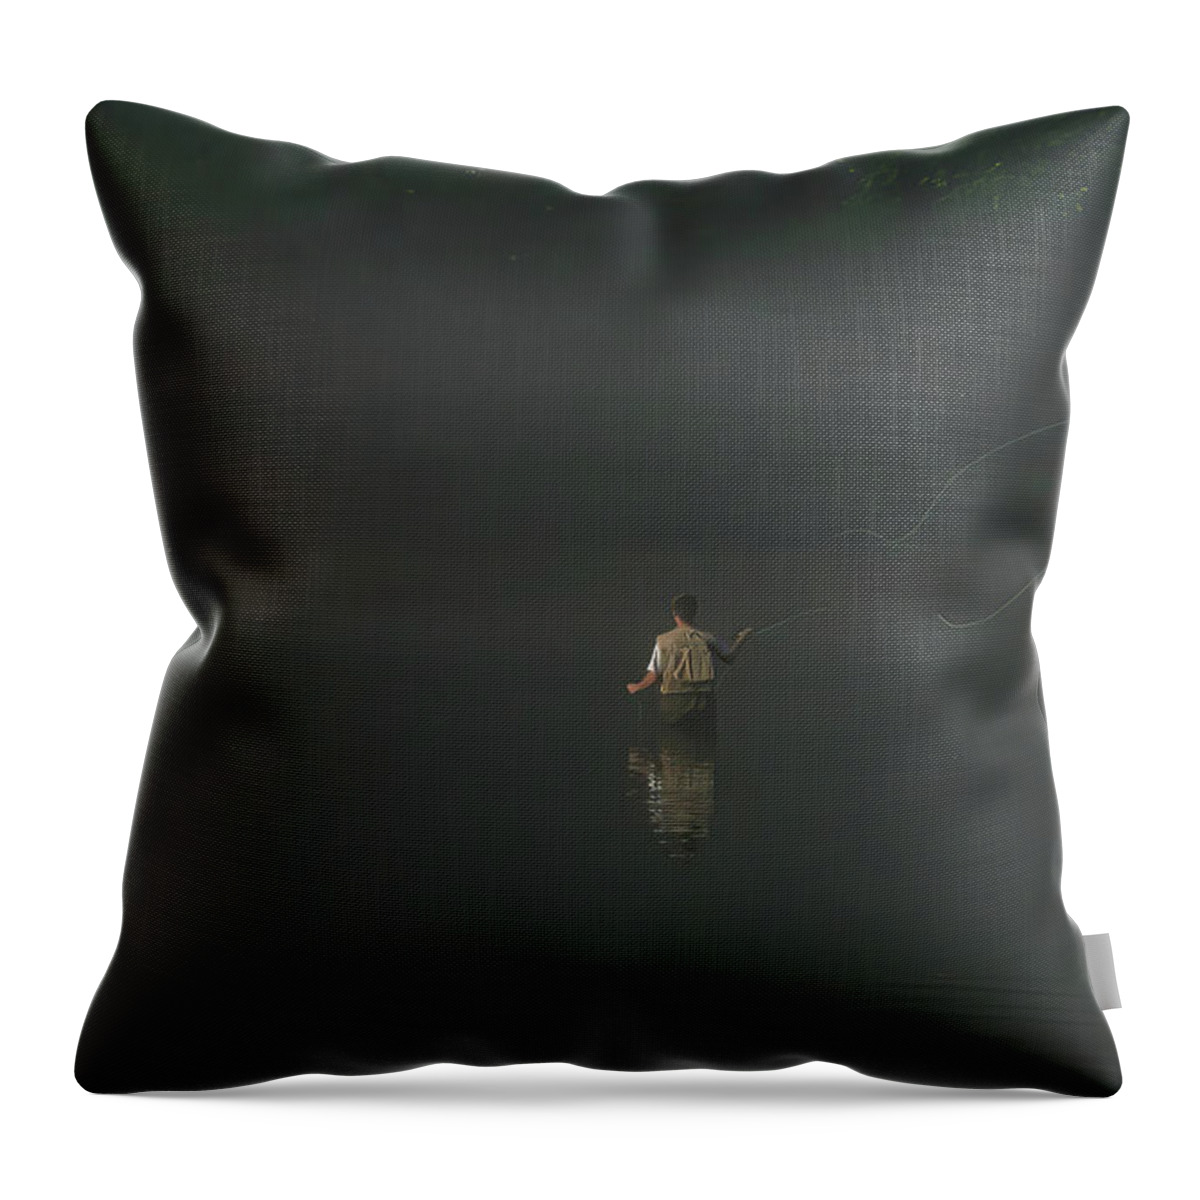 Fishing Throw Pillow featuring the photograph Cast by Lens Art Photography By Larry Trager